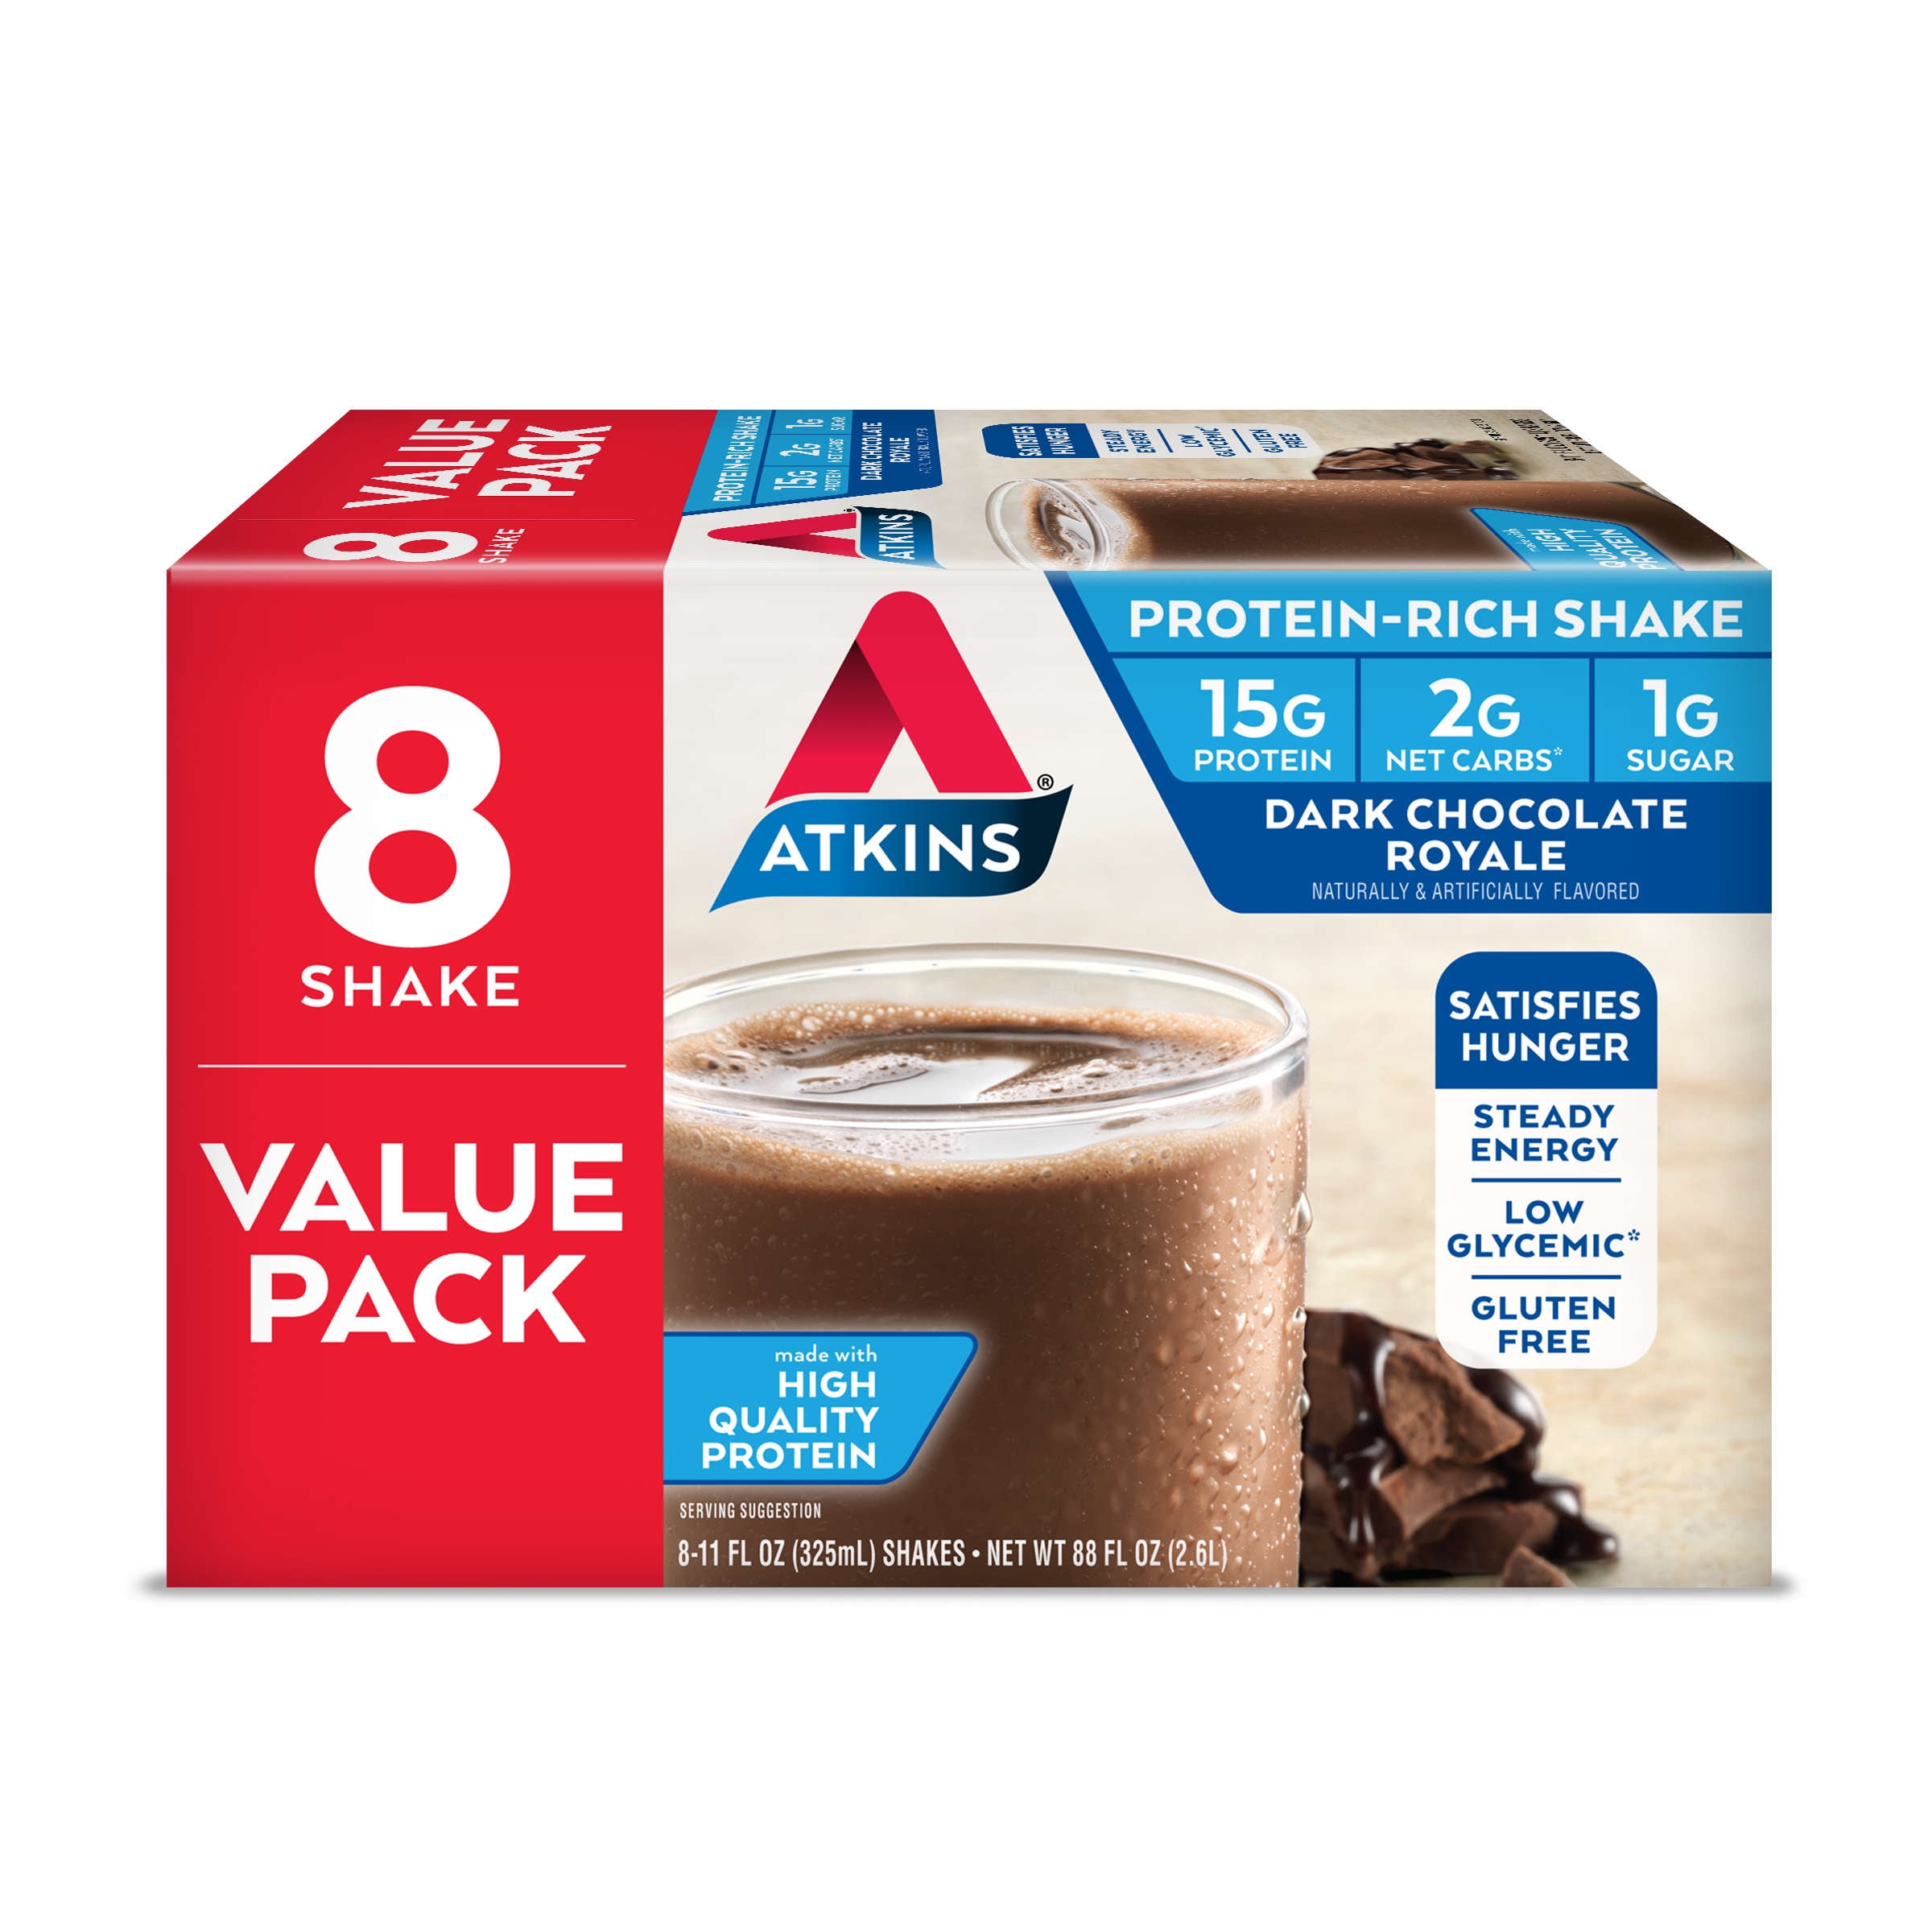 Photo 1 of Atkins Gluten Free Protein-Rich Shake, Dark Chocolate Royale, Keto Friendly, 8 Count (Ready to Drink) EXPIRED 11/17/2021
